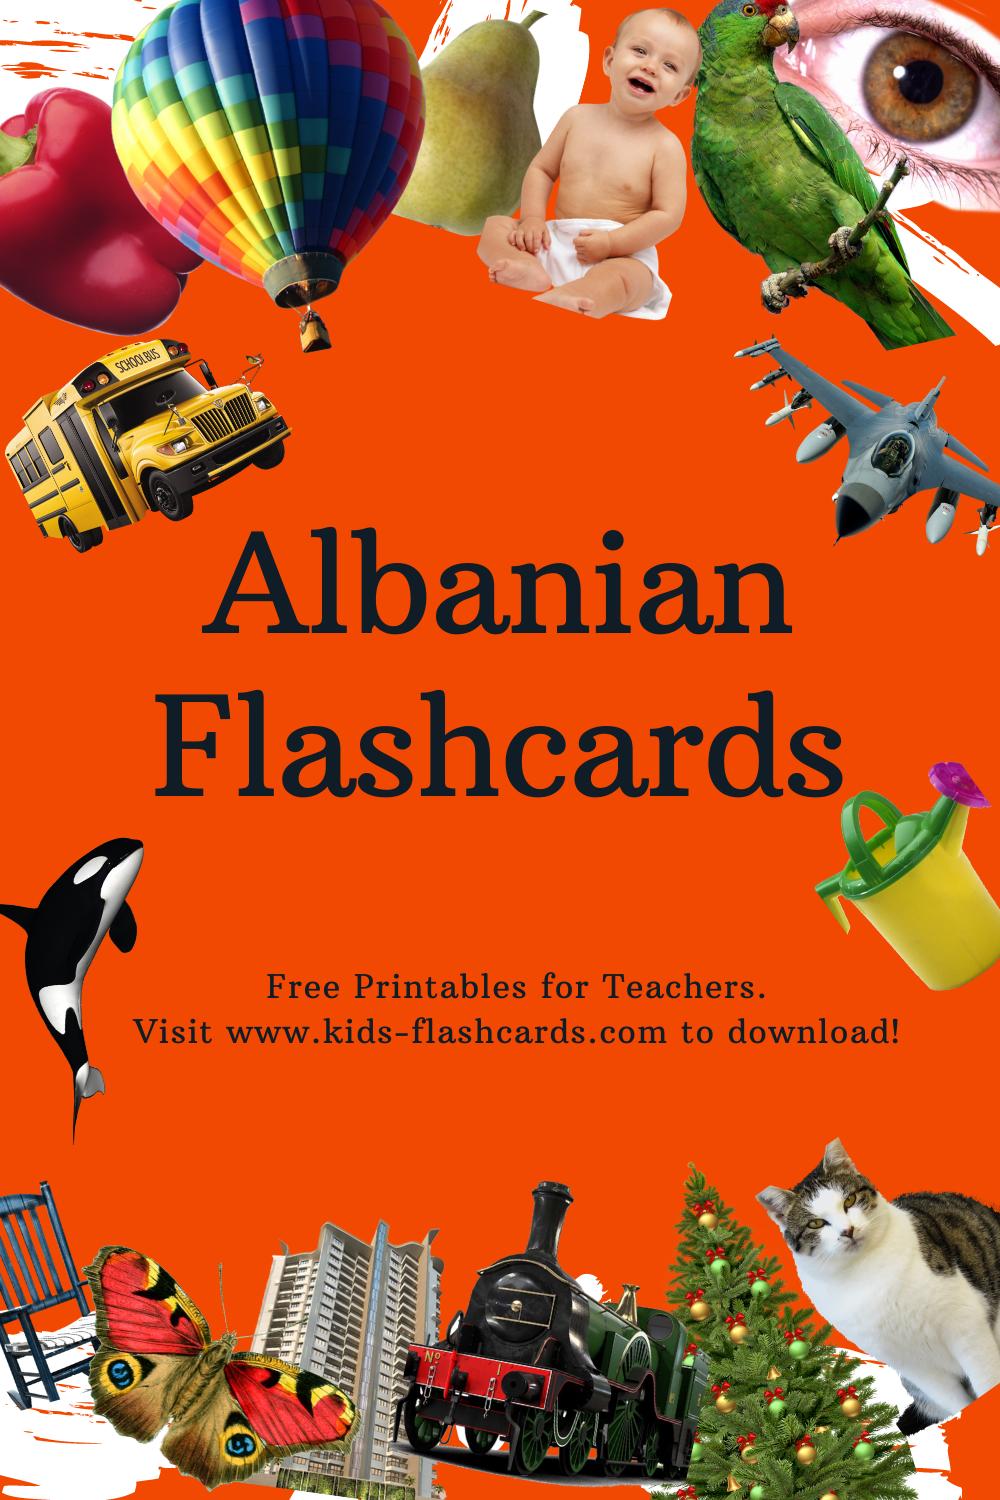 Worksheets to learn Albanian language